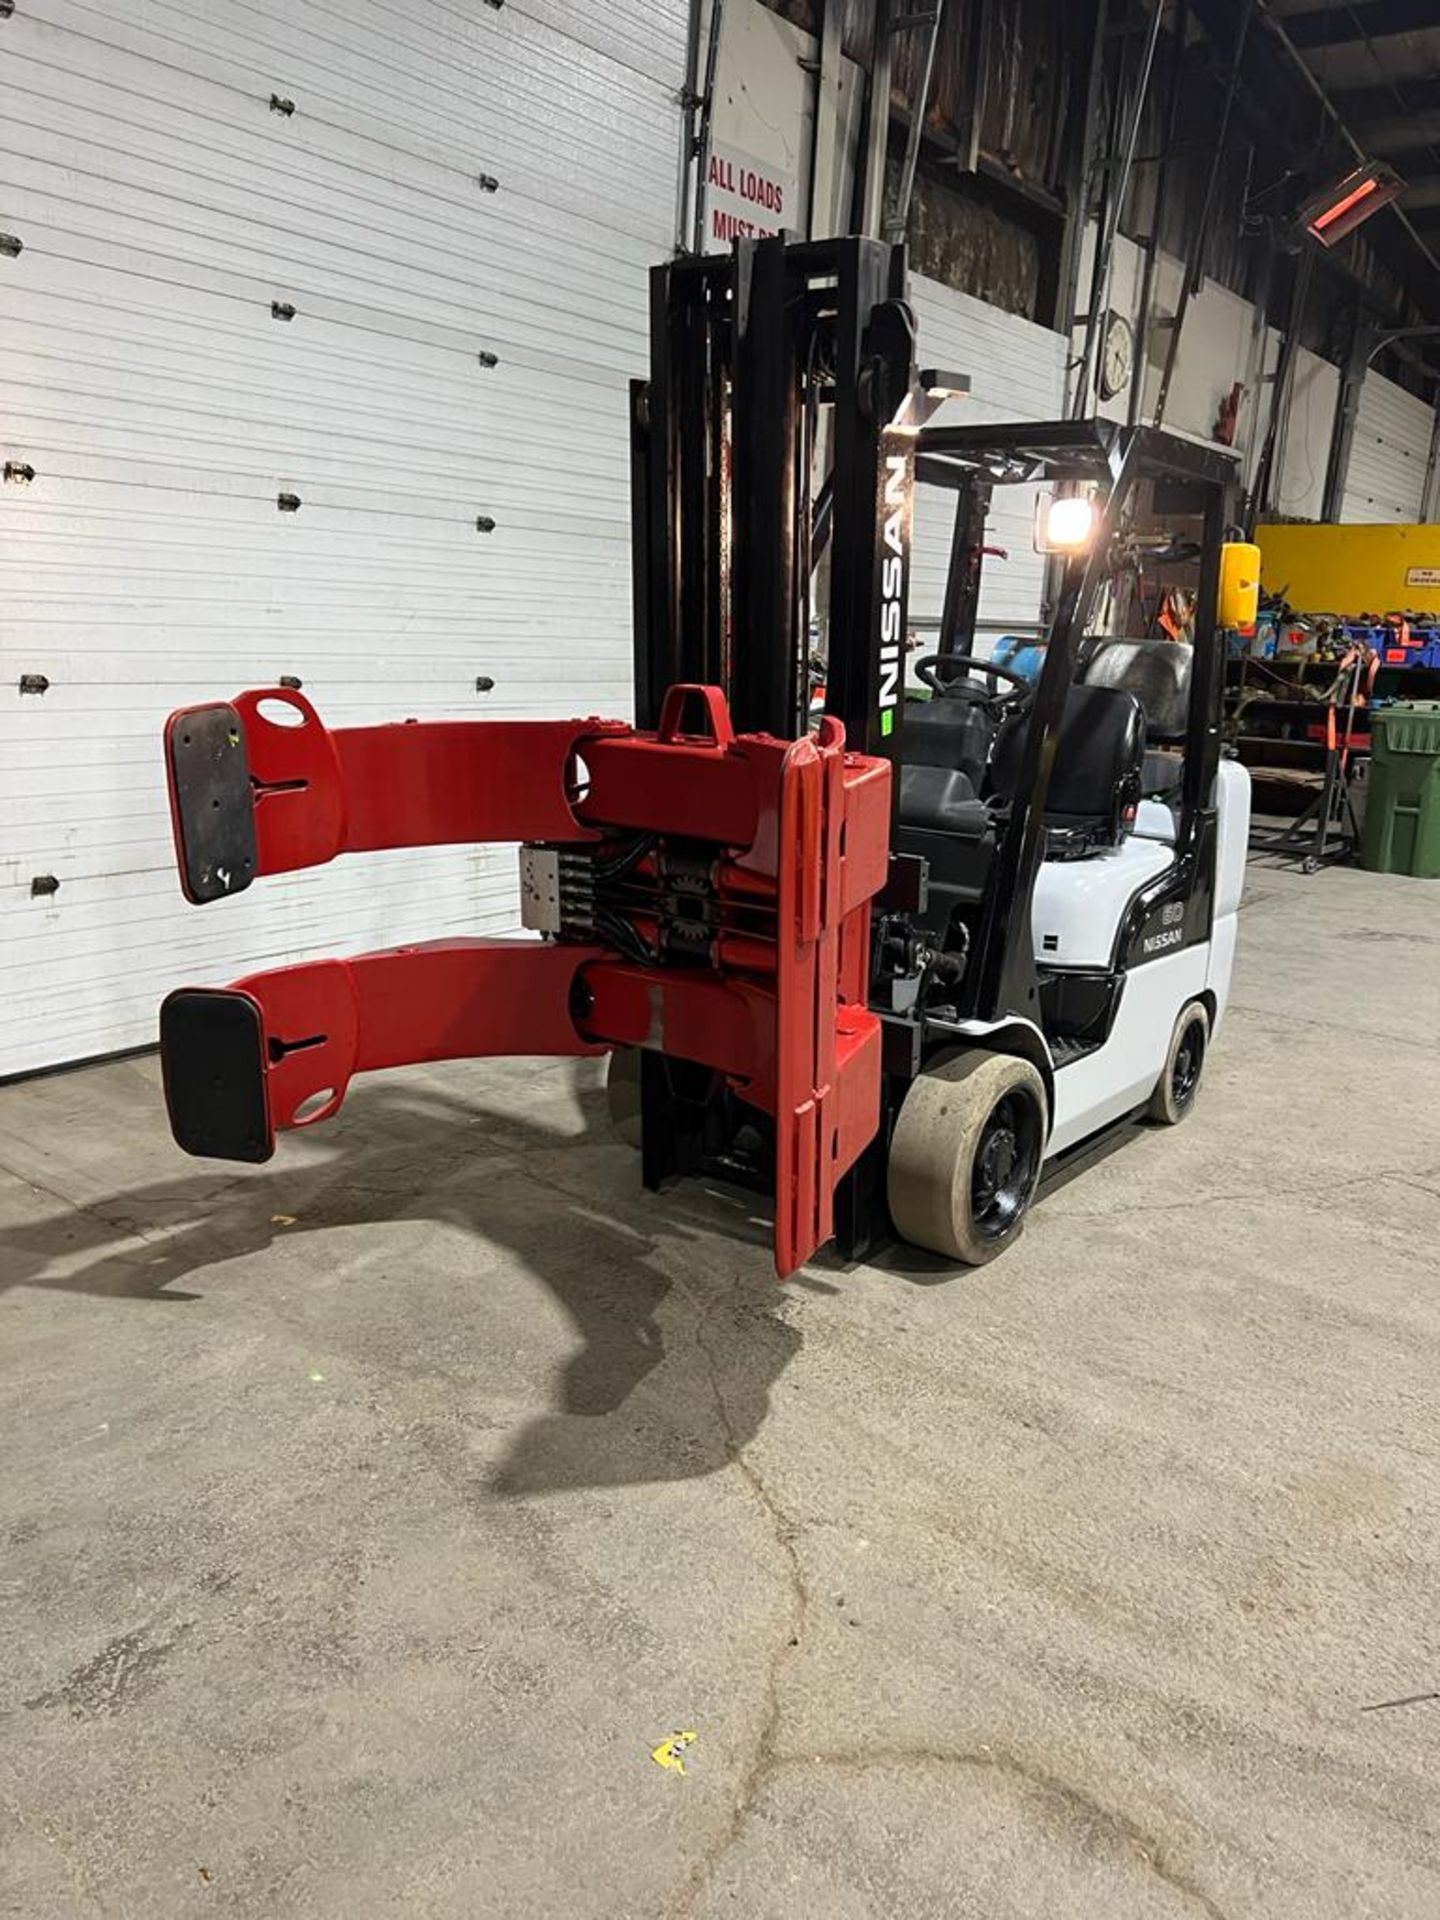 NICE Nissan 6,000lbs Capacity Forklift LPG (propane) with ROTATOR CLAMP Attachament - FREE - Image 2 of 5